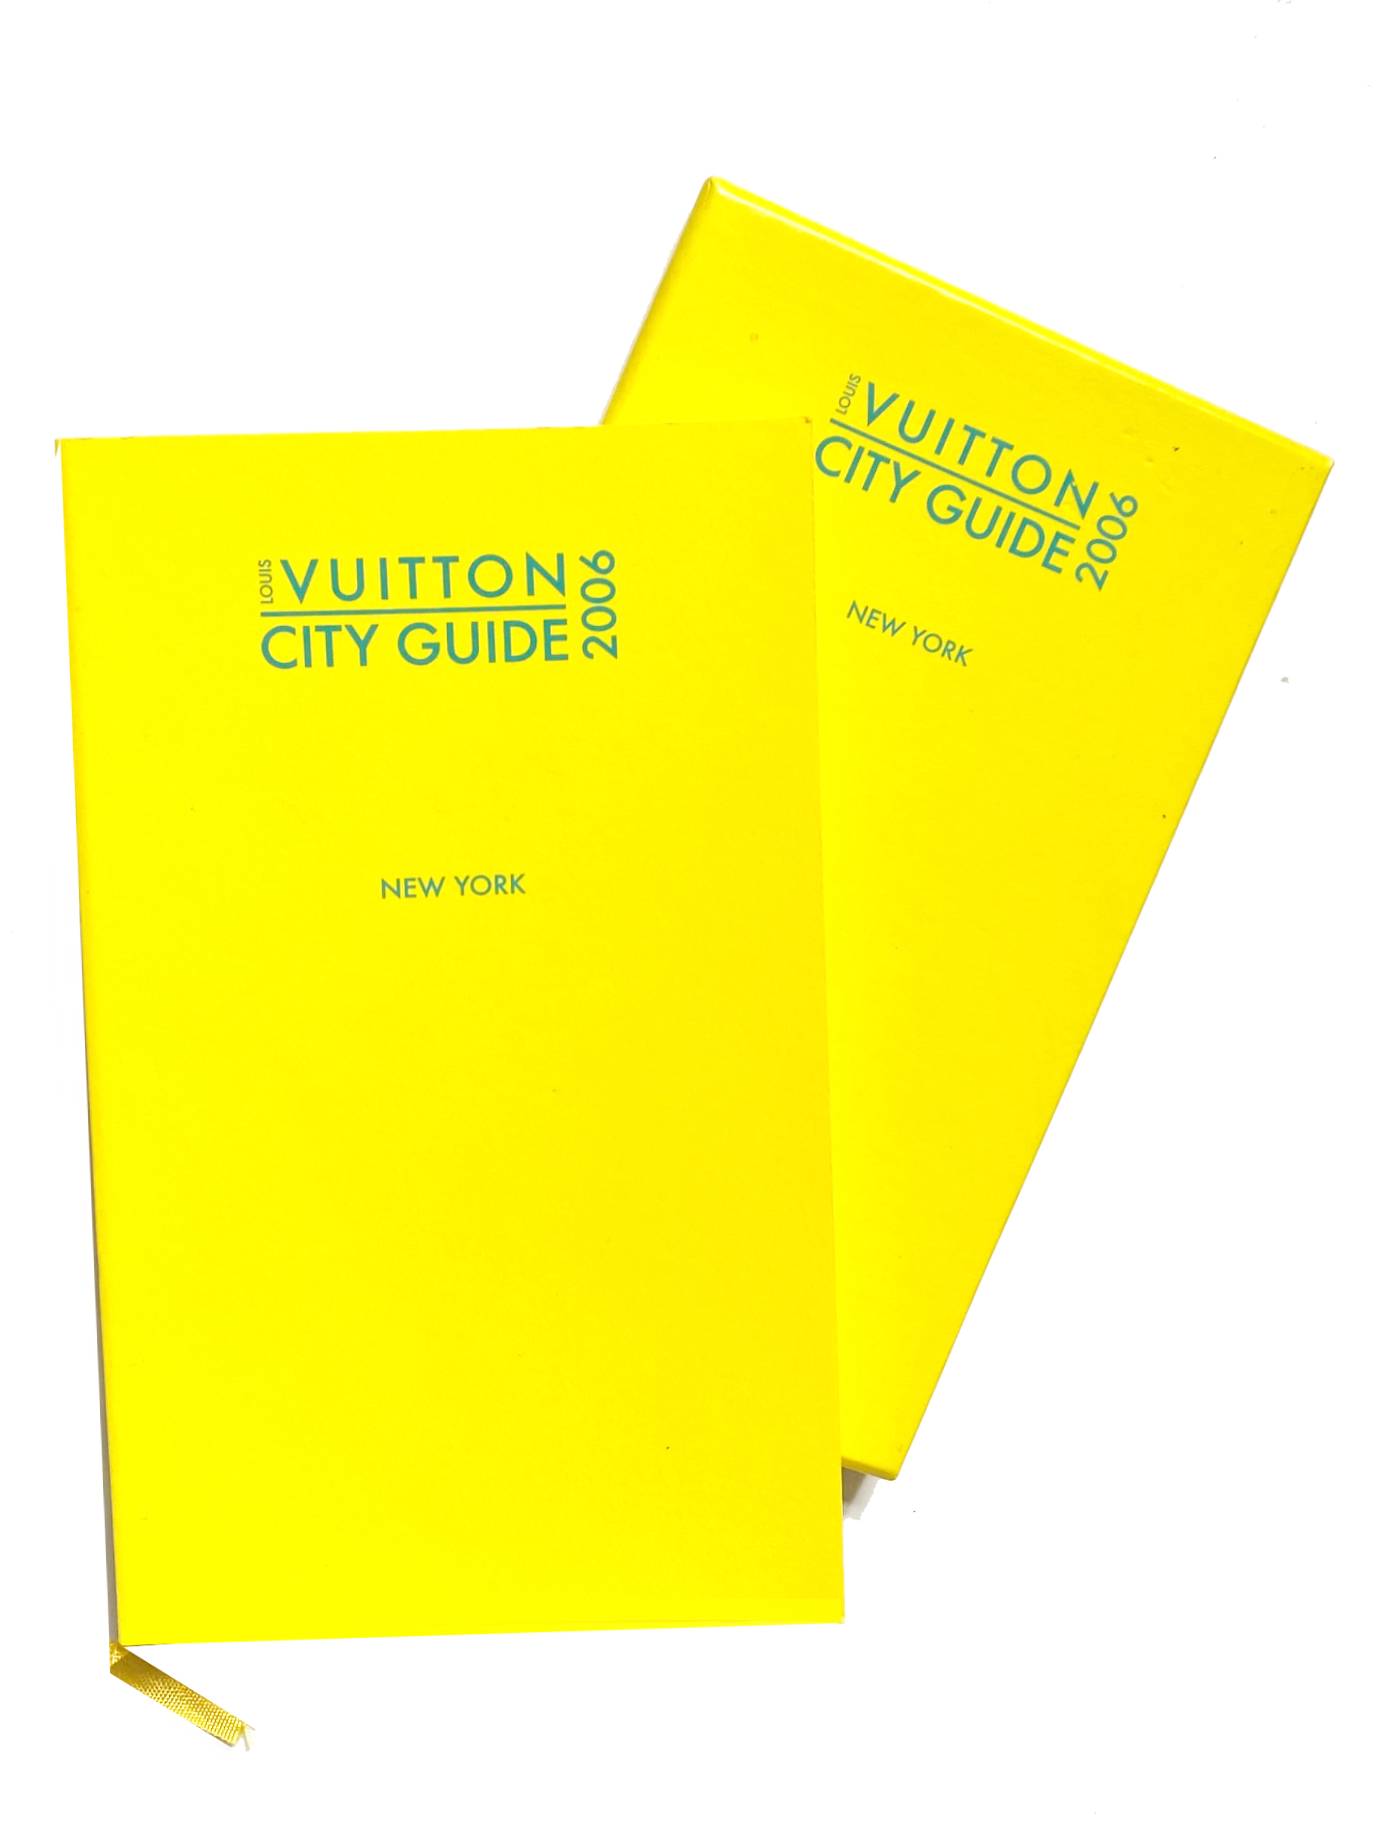 2006 Louis Vuitton New York City Guide - style - CHNGR